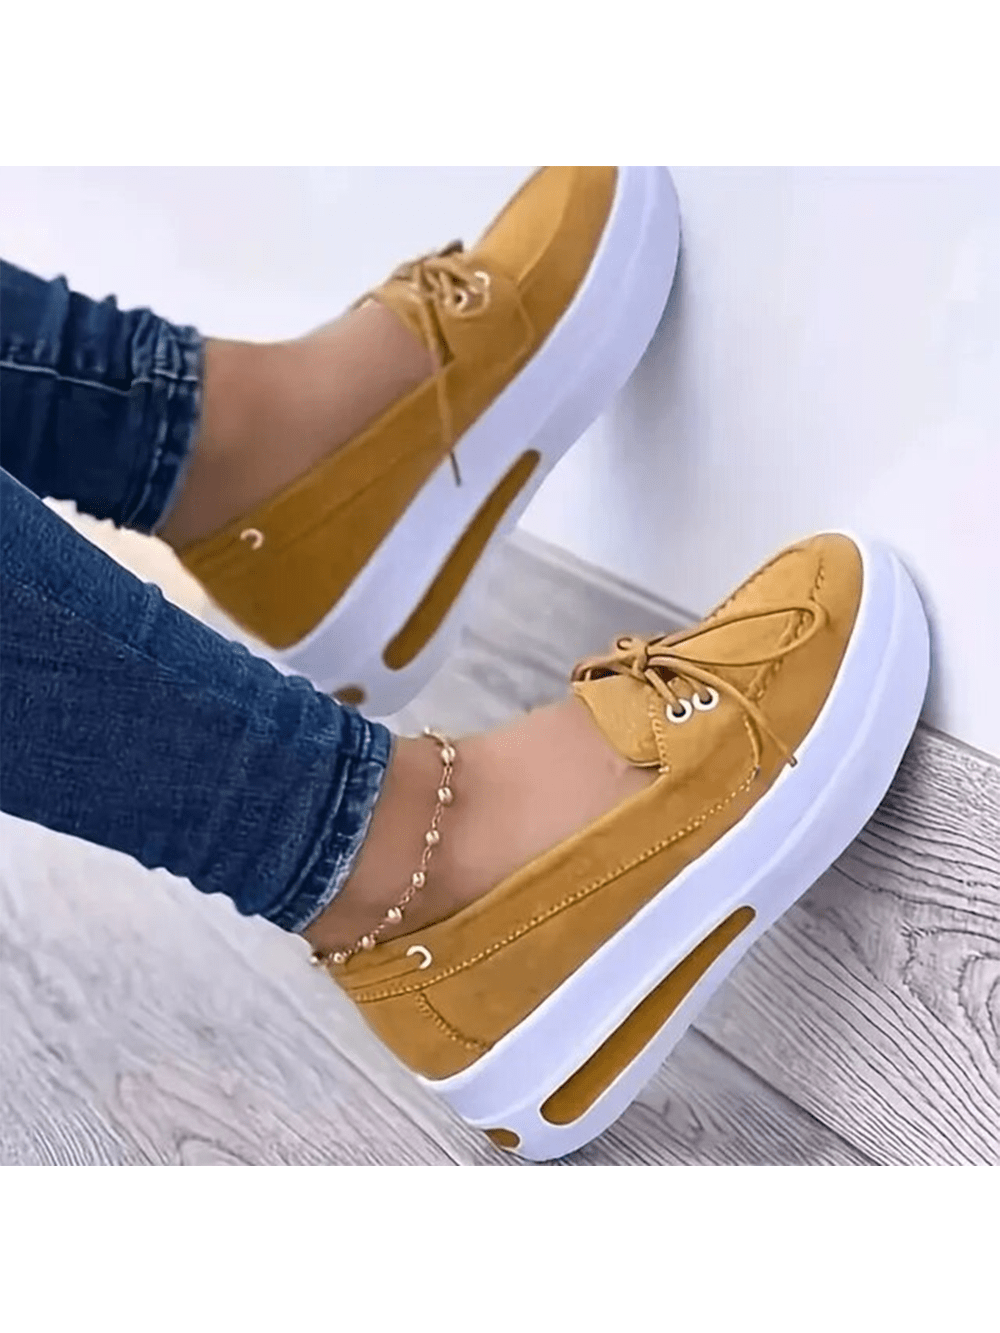 Women Block Shoes Slip On Closed Toe Platform Flat Wedge Casual Lace Up Sneakers-Yellow-1